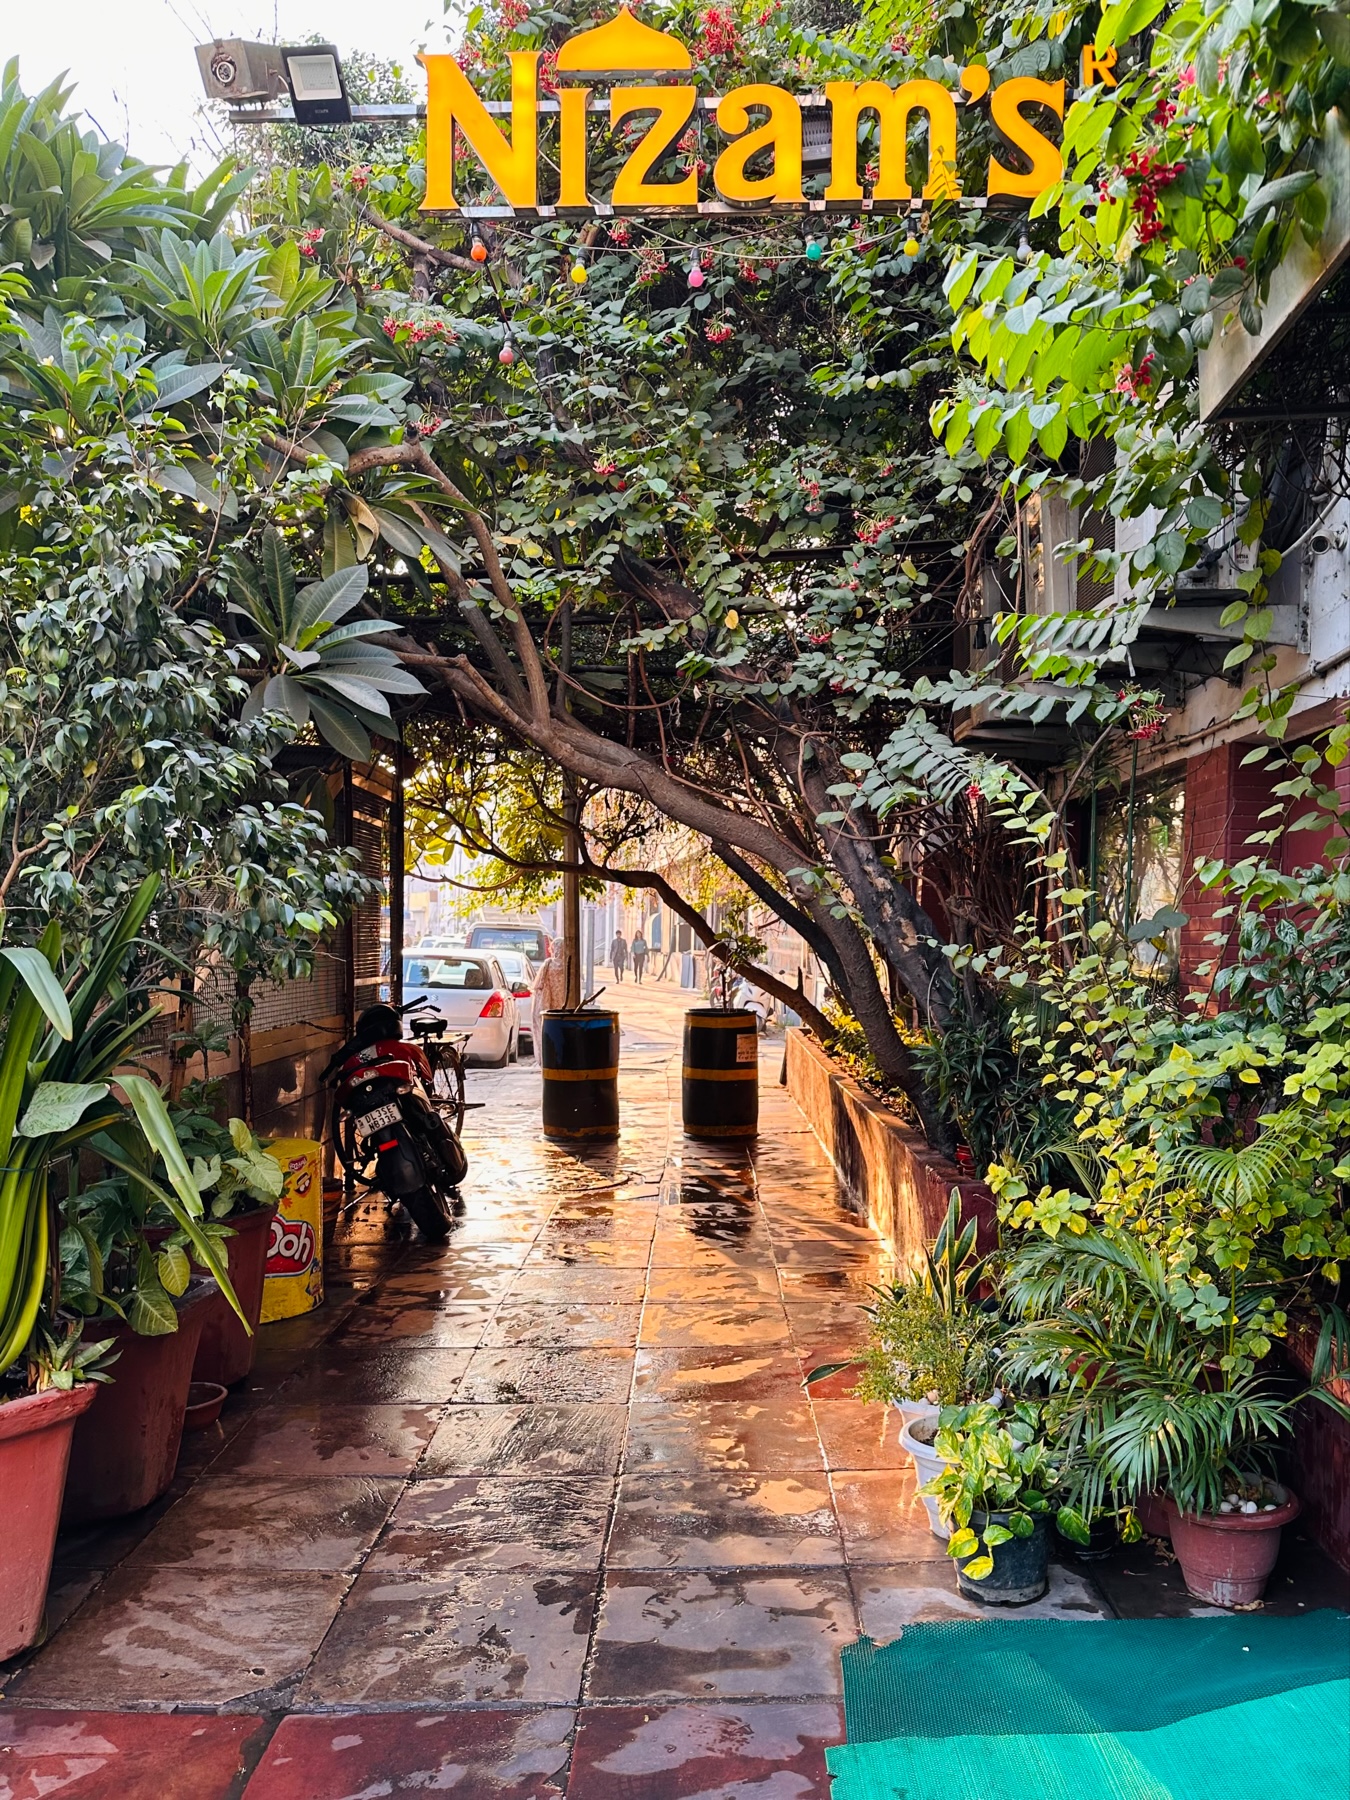 Sidewalk full of plants and a sign that reads “Nizam’s” with some orange sunlight coming through a sort-of tunnel made by foliage.